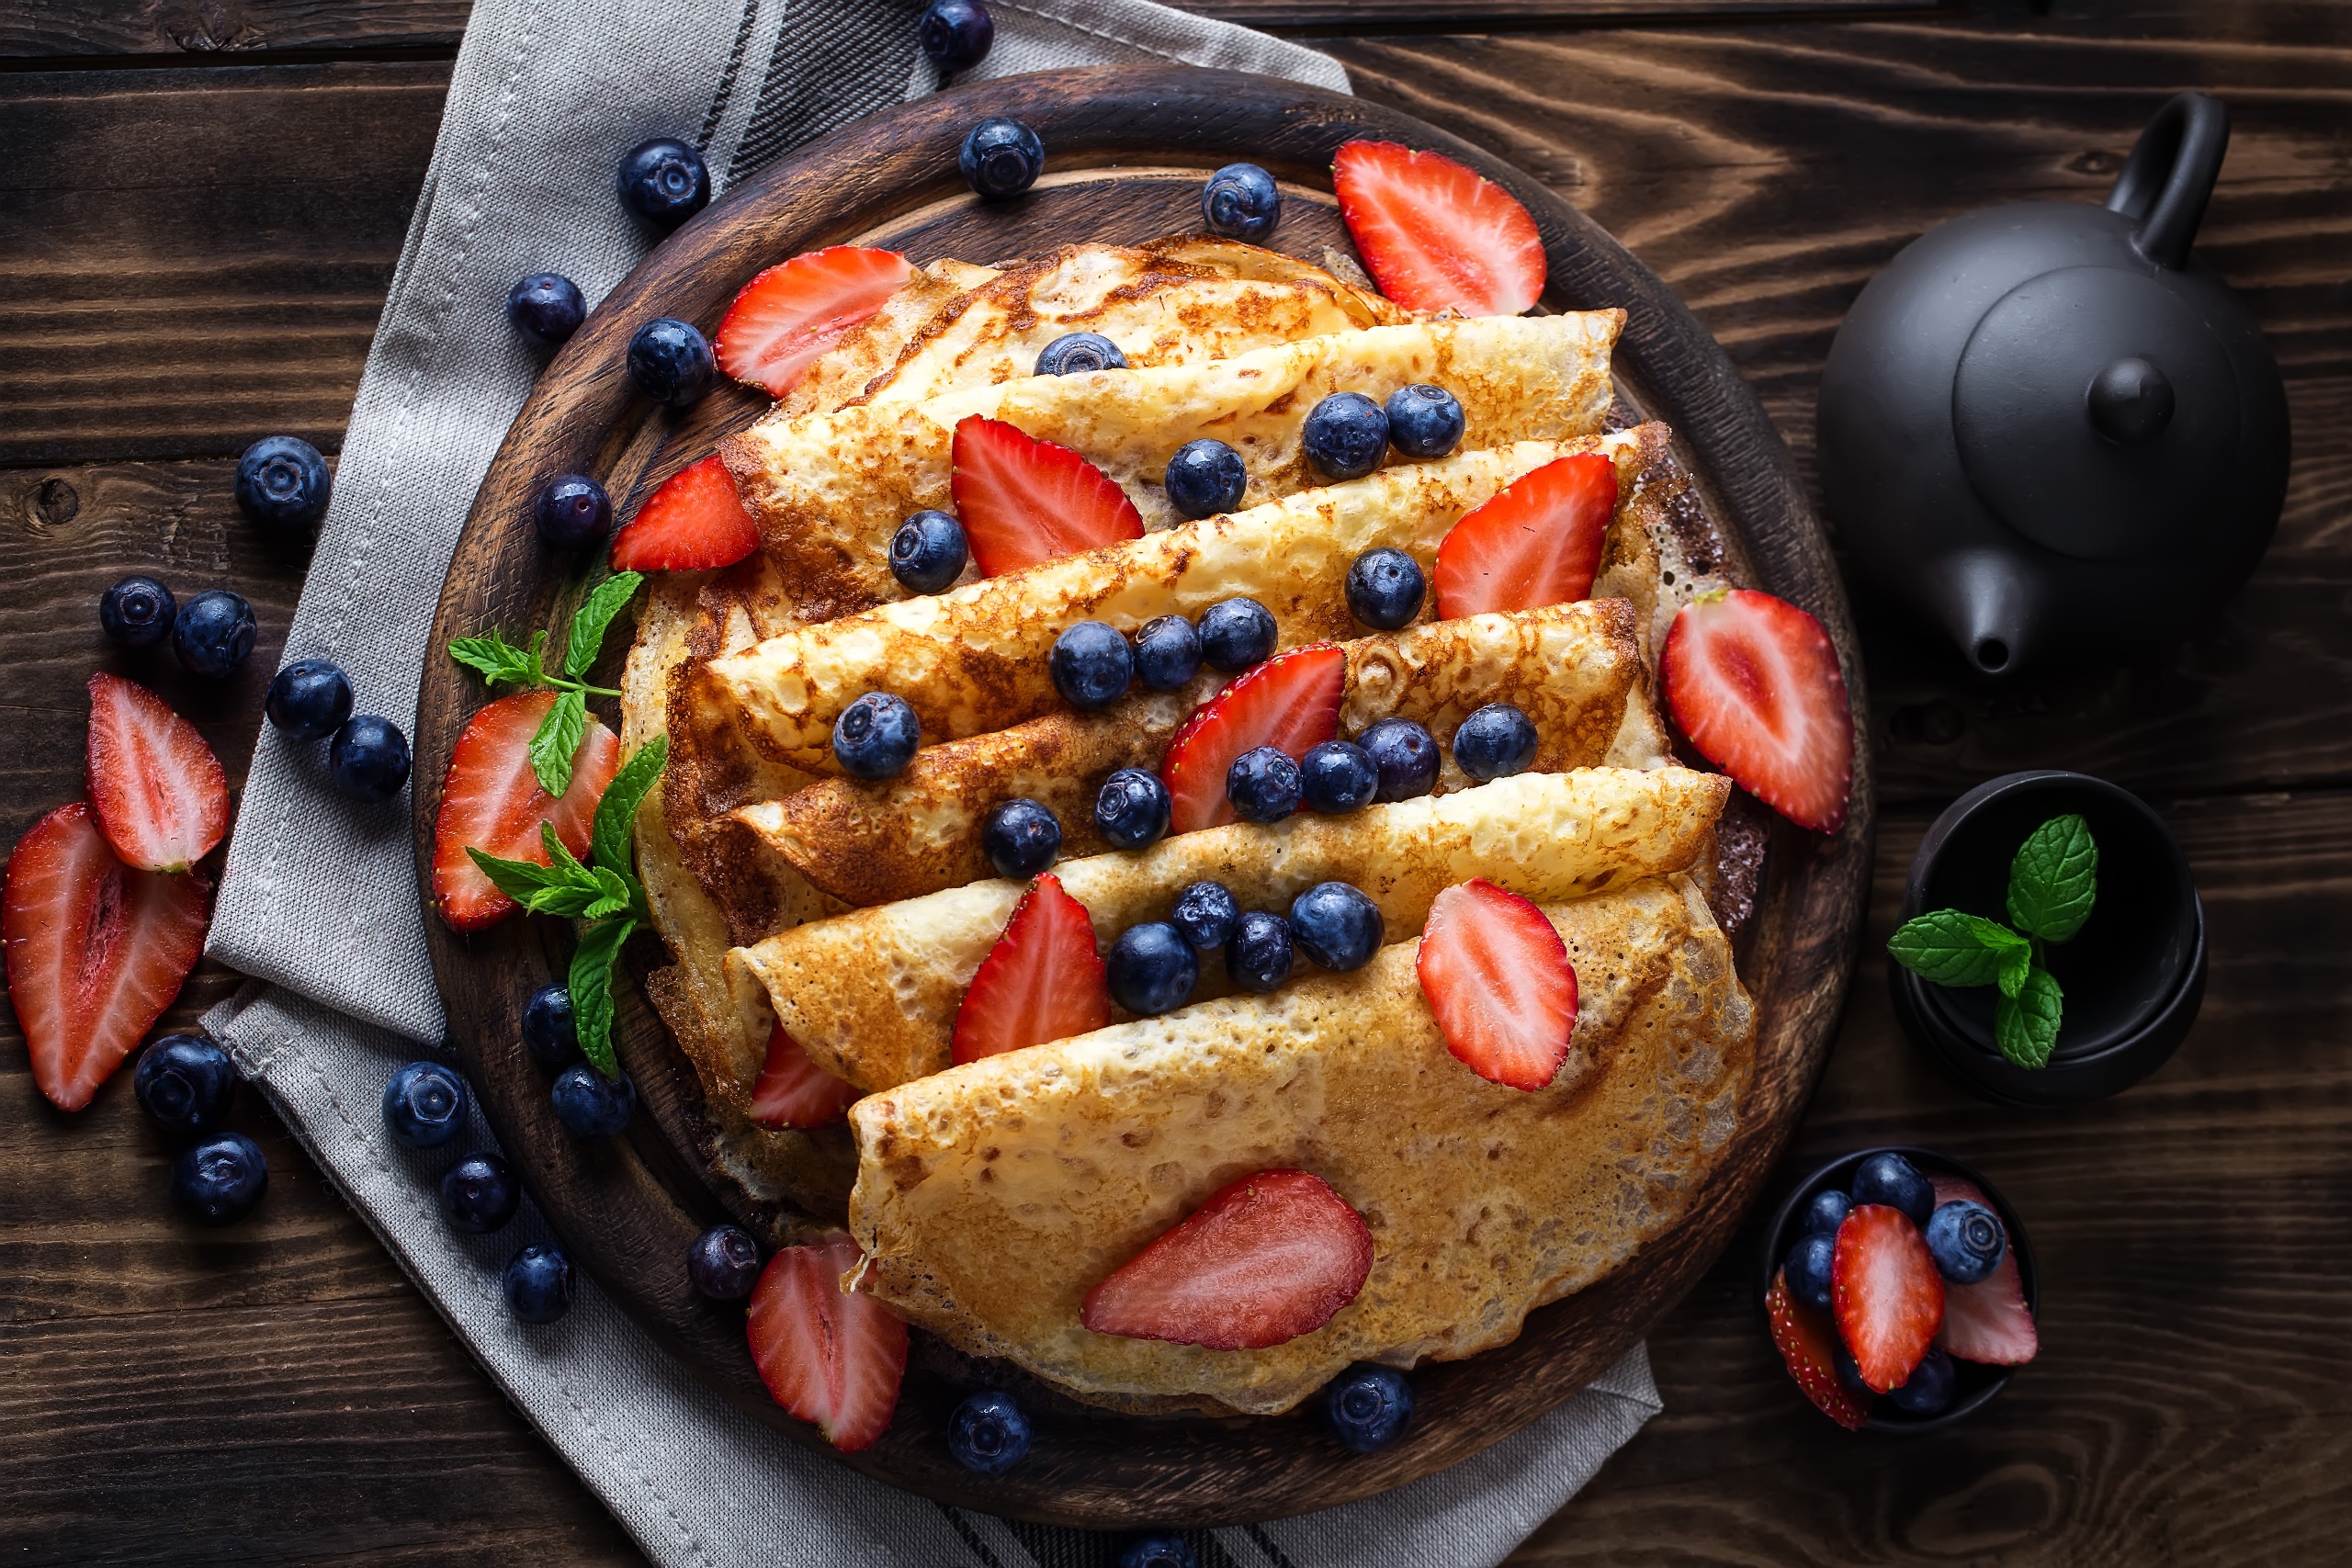 Food Fruit Berries Strawberries Crepes Blueberries Mint Leaves Wooden Surface Napkin 2560x1707